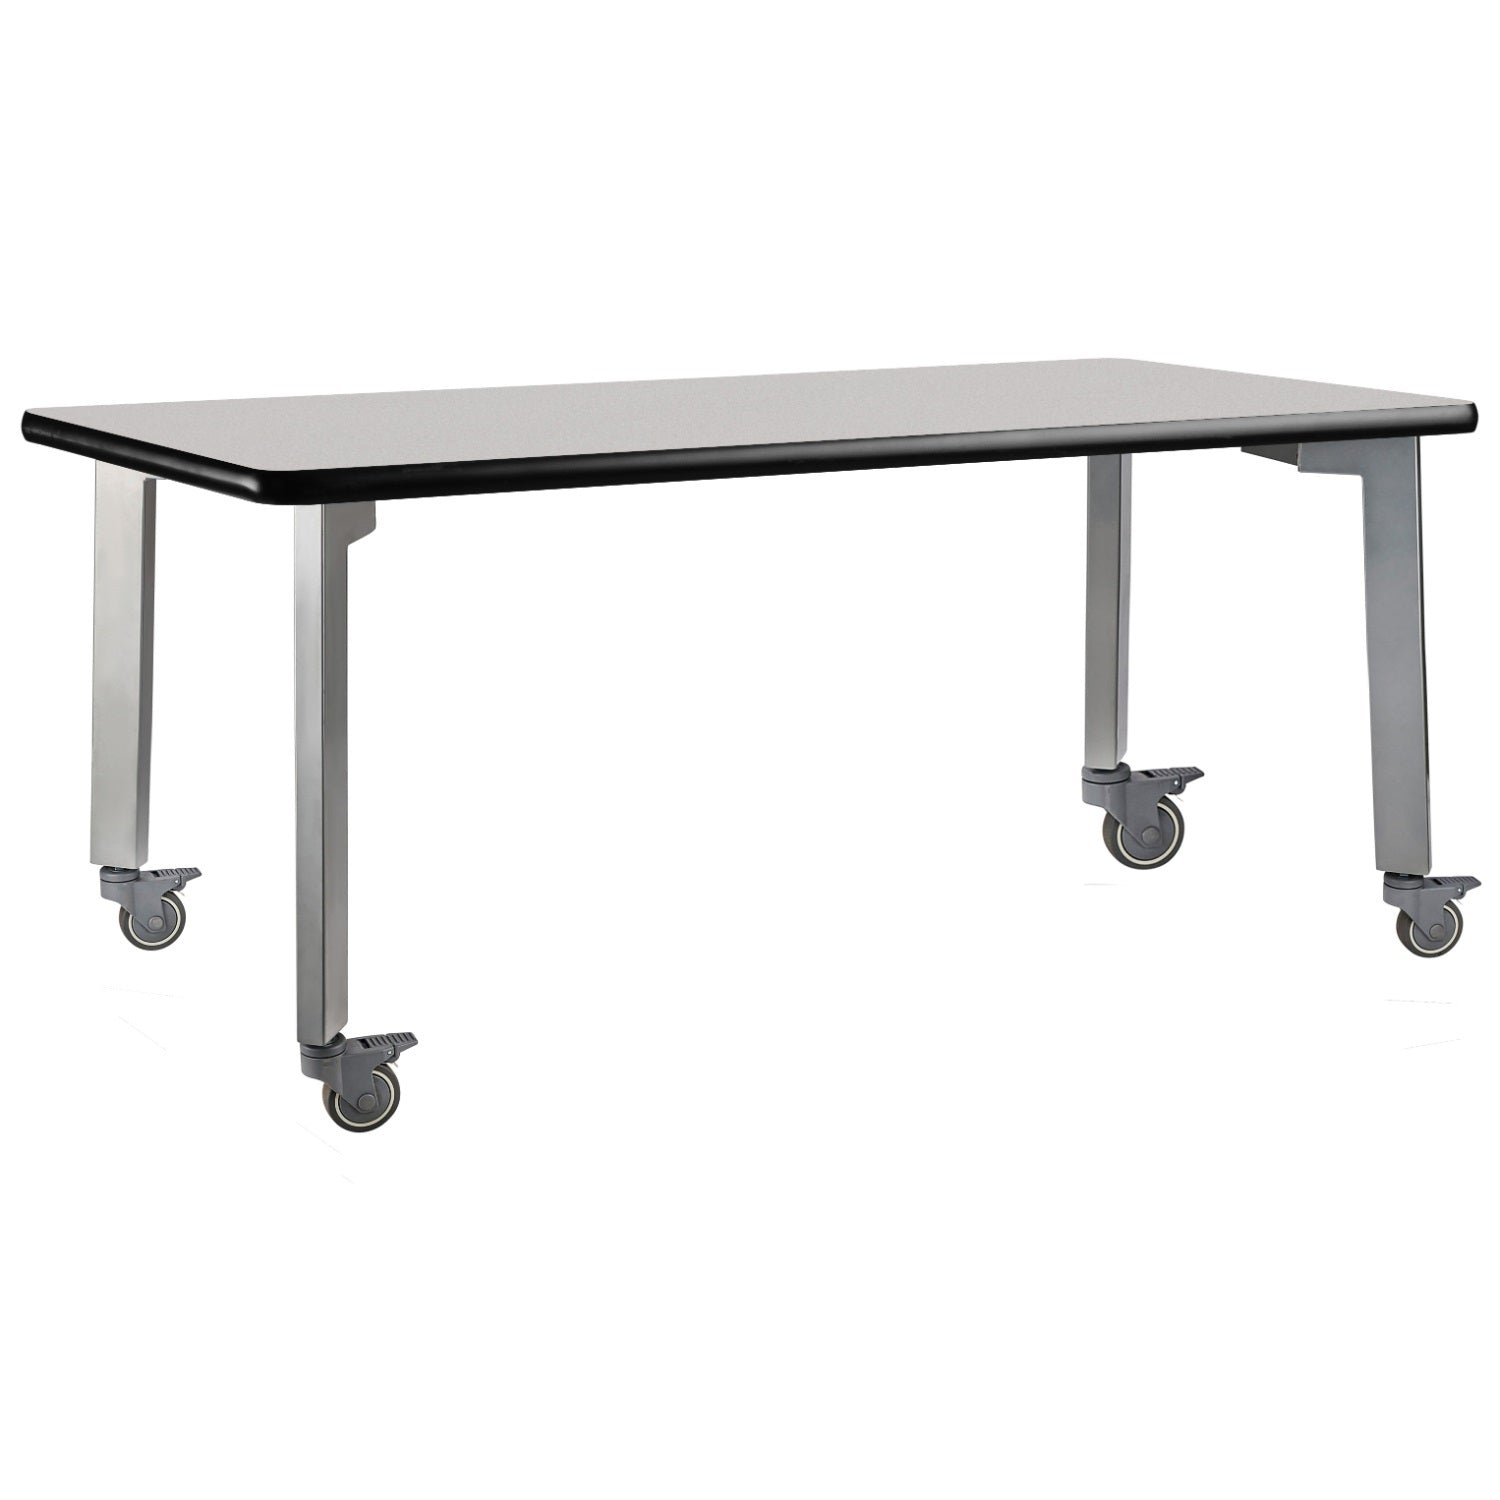 Titan Mobile Table, 30" x 84", Supreme High Pressure Laminate Top with MDF Core and ProtectEdge